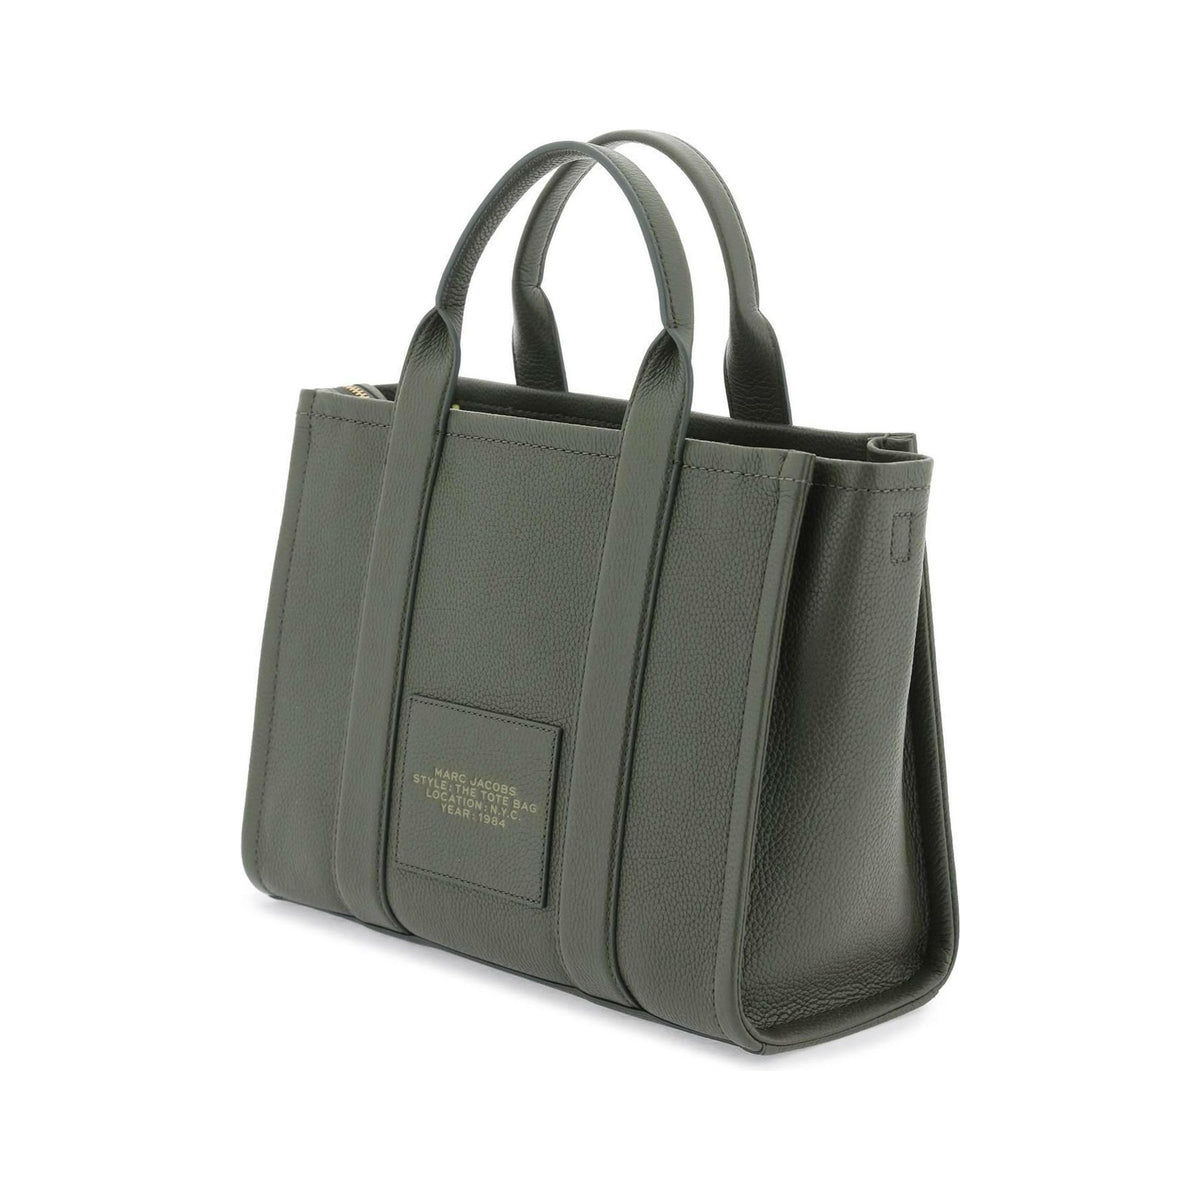 Forest The Leather Medium Tote Bag MARC JACOBS JOHN JULIA.